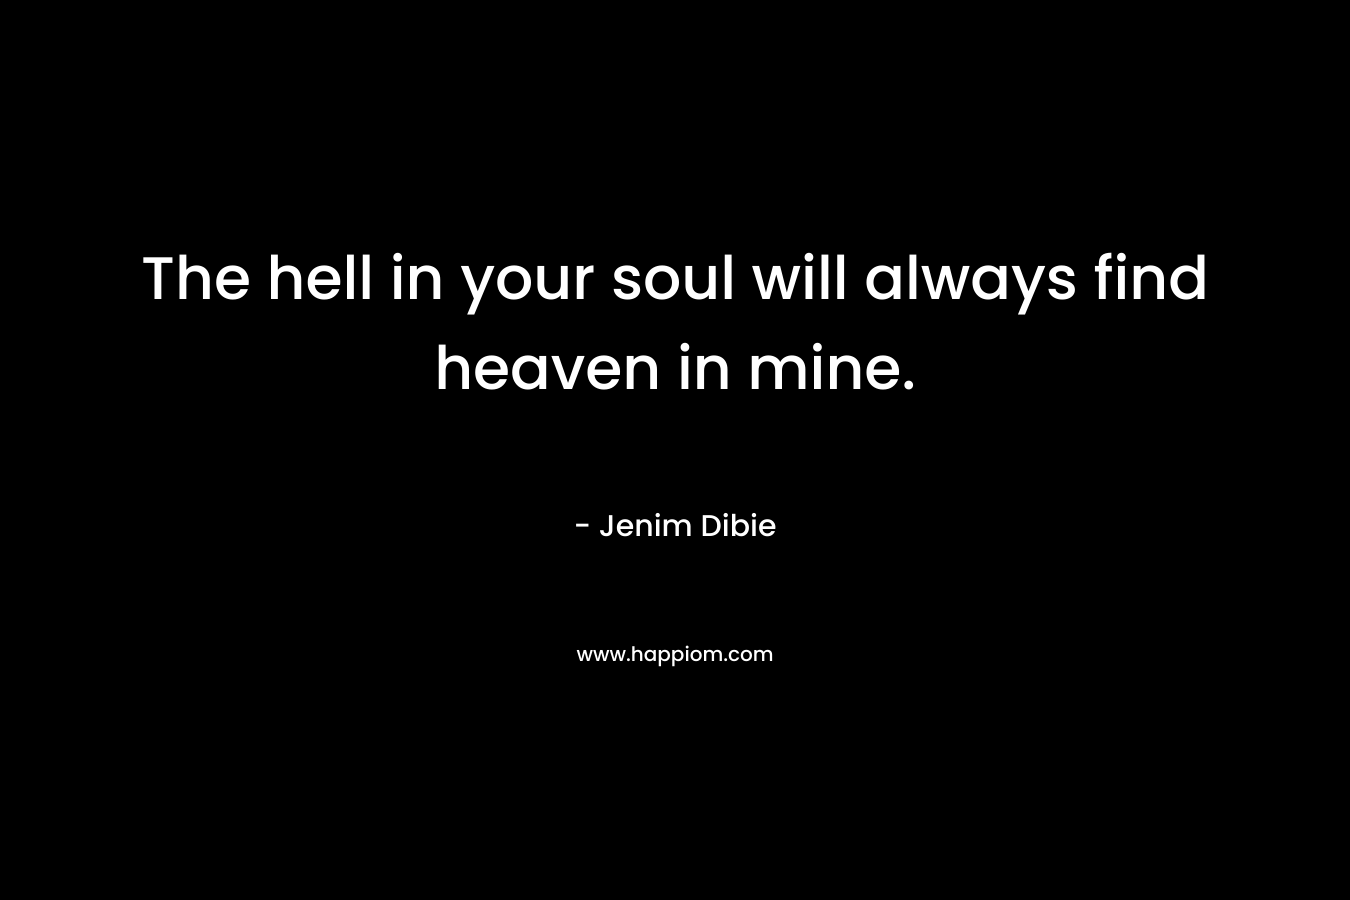 The hell in your soul will always find heaven in mine.